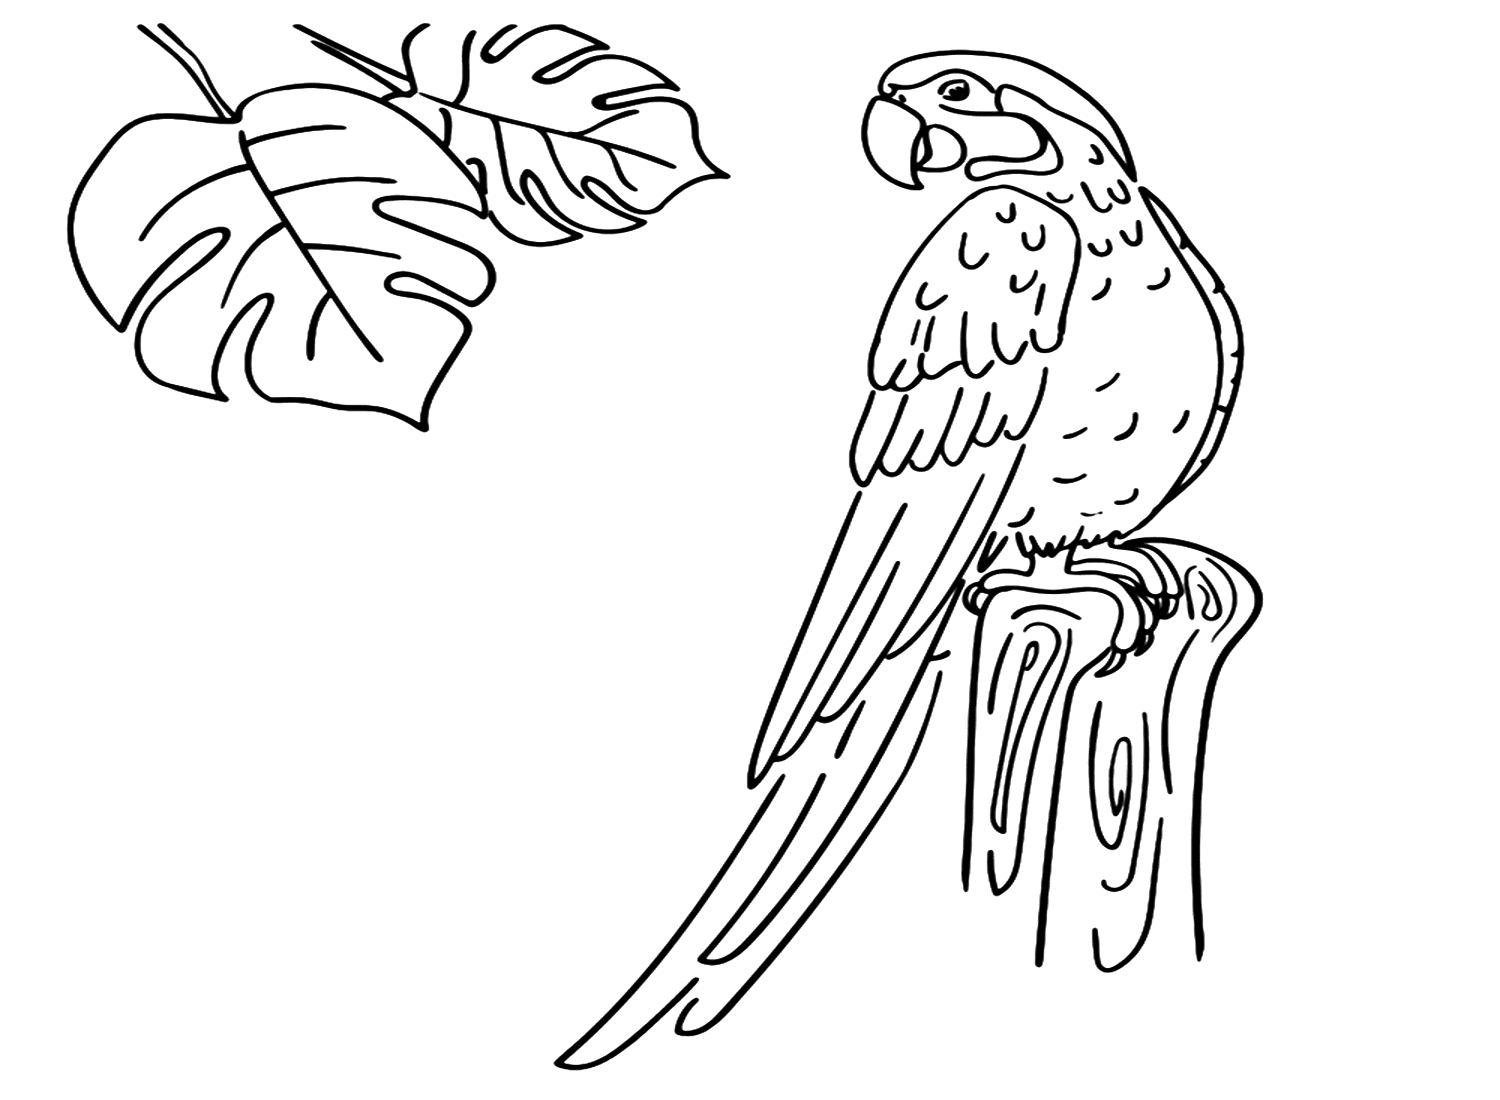 Parakeet Image To Color from Parakeet